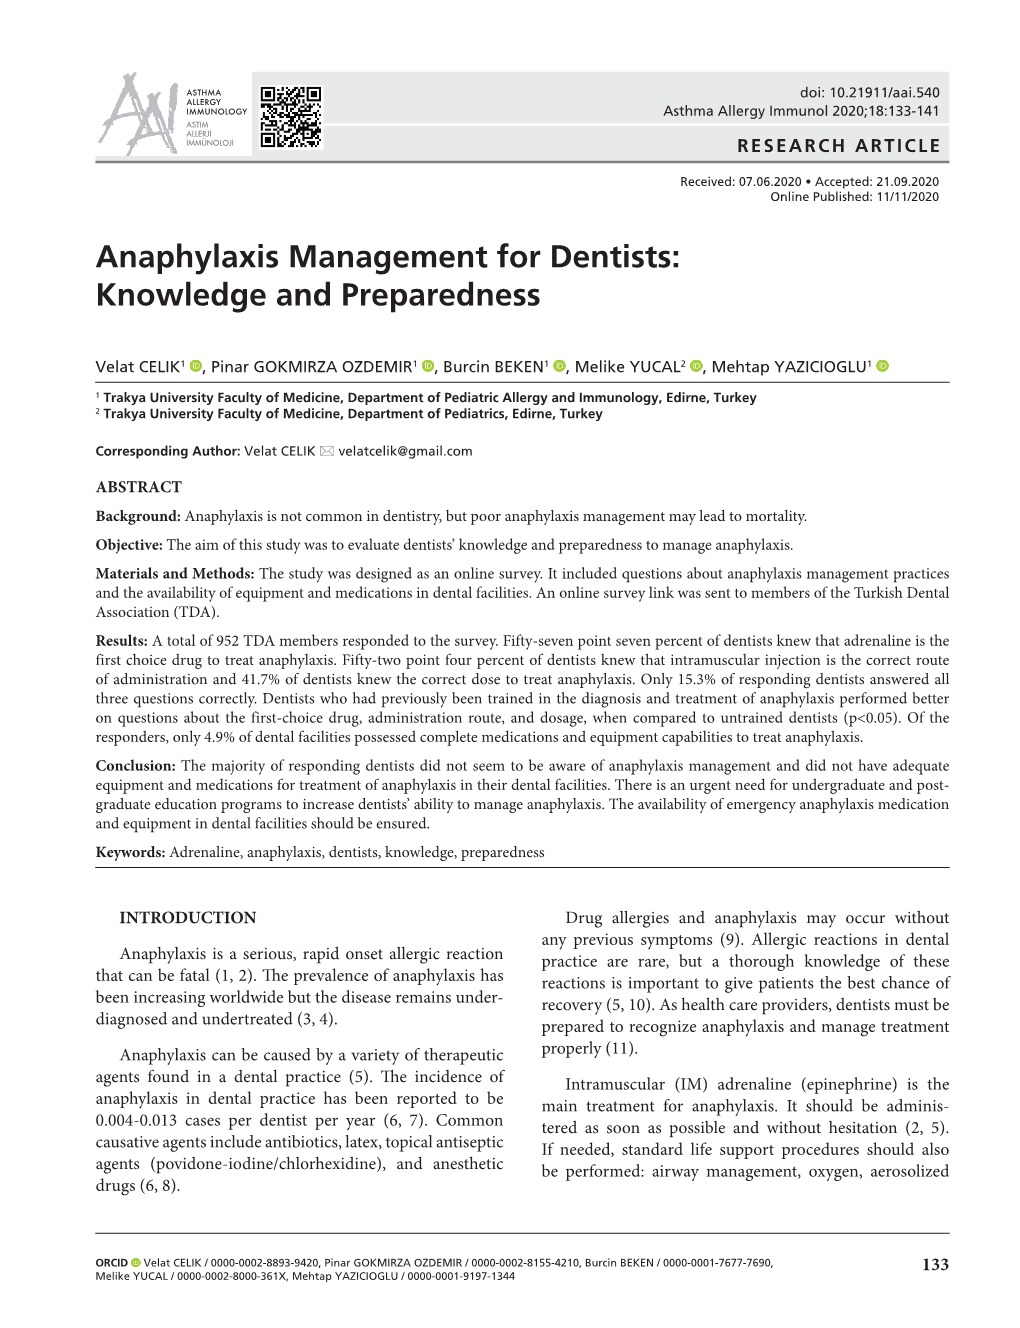 Anaphylaxis Management for Dentists: Knowledge and Preparedness